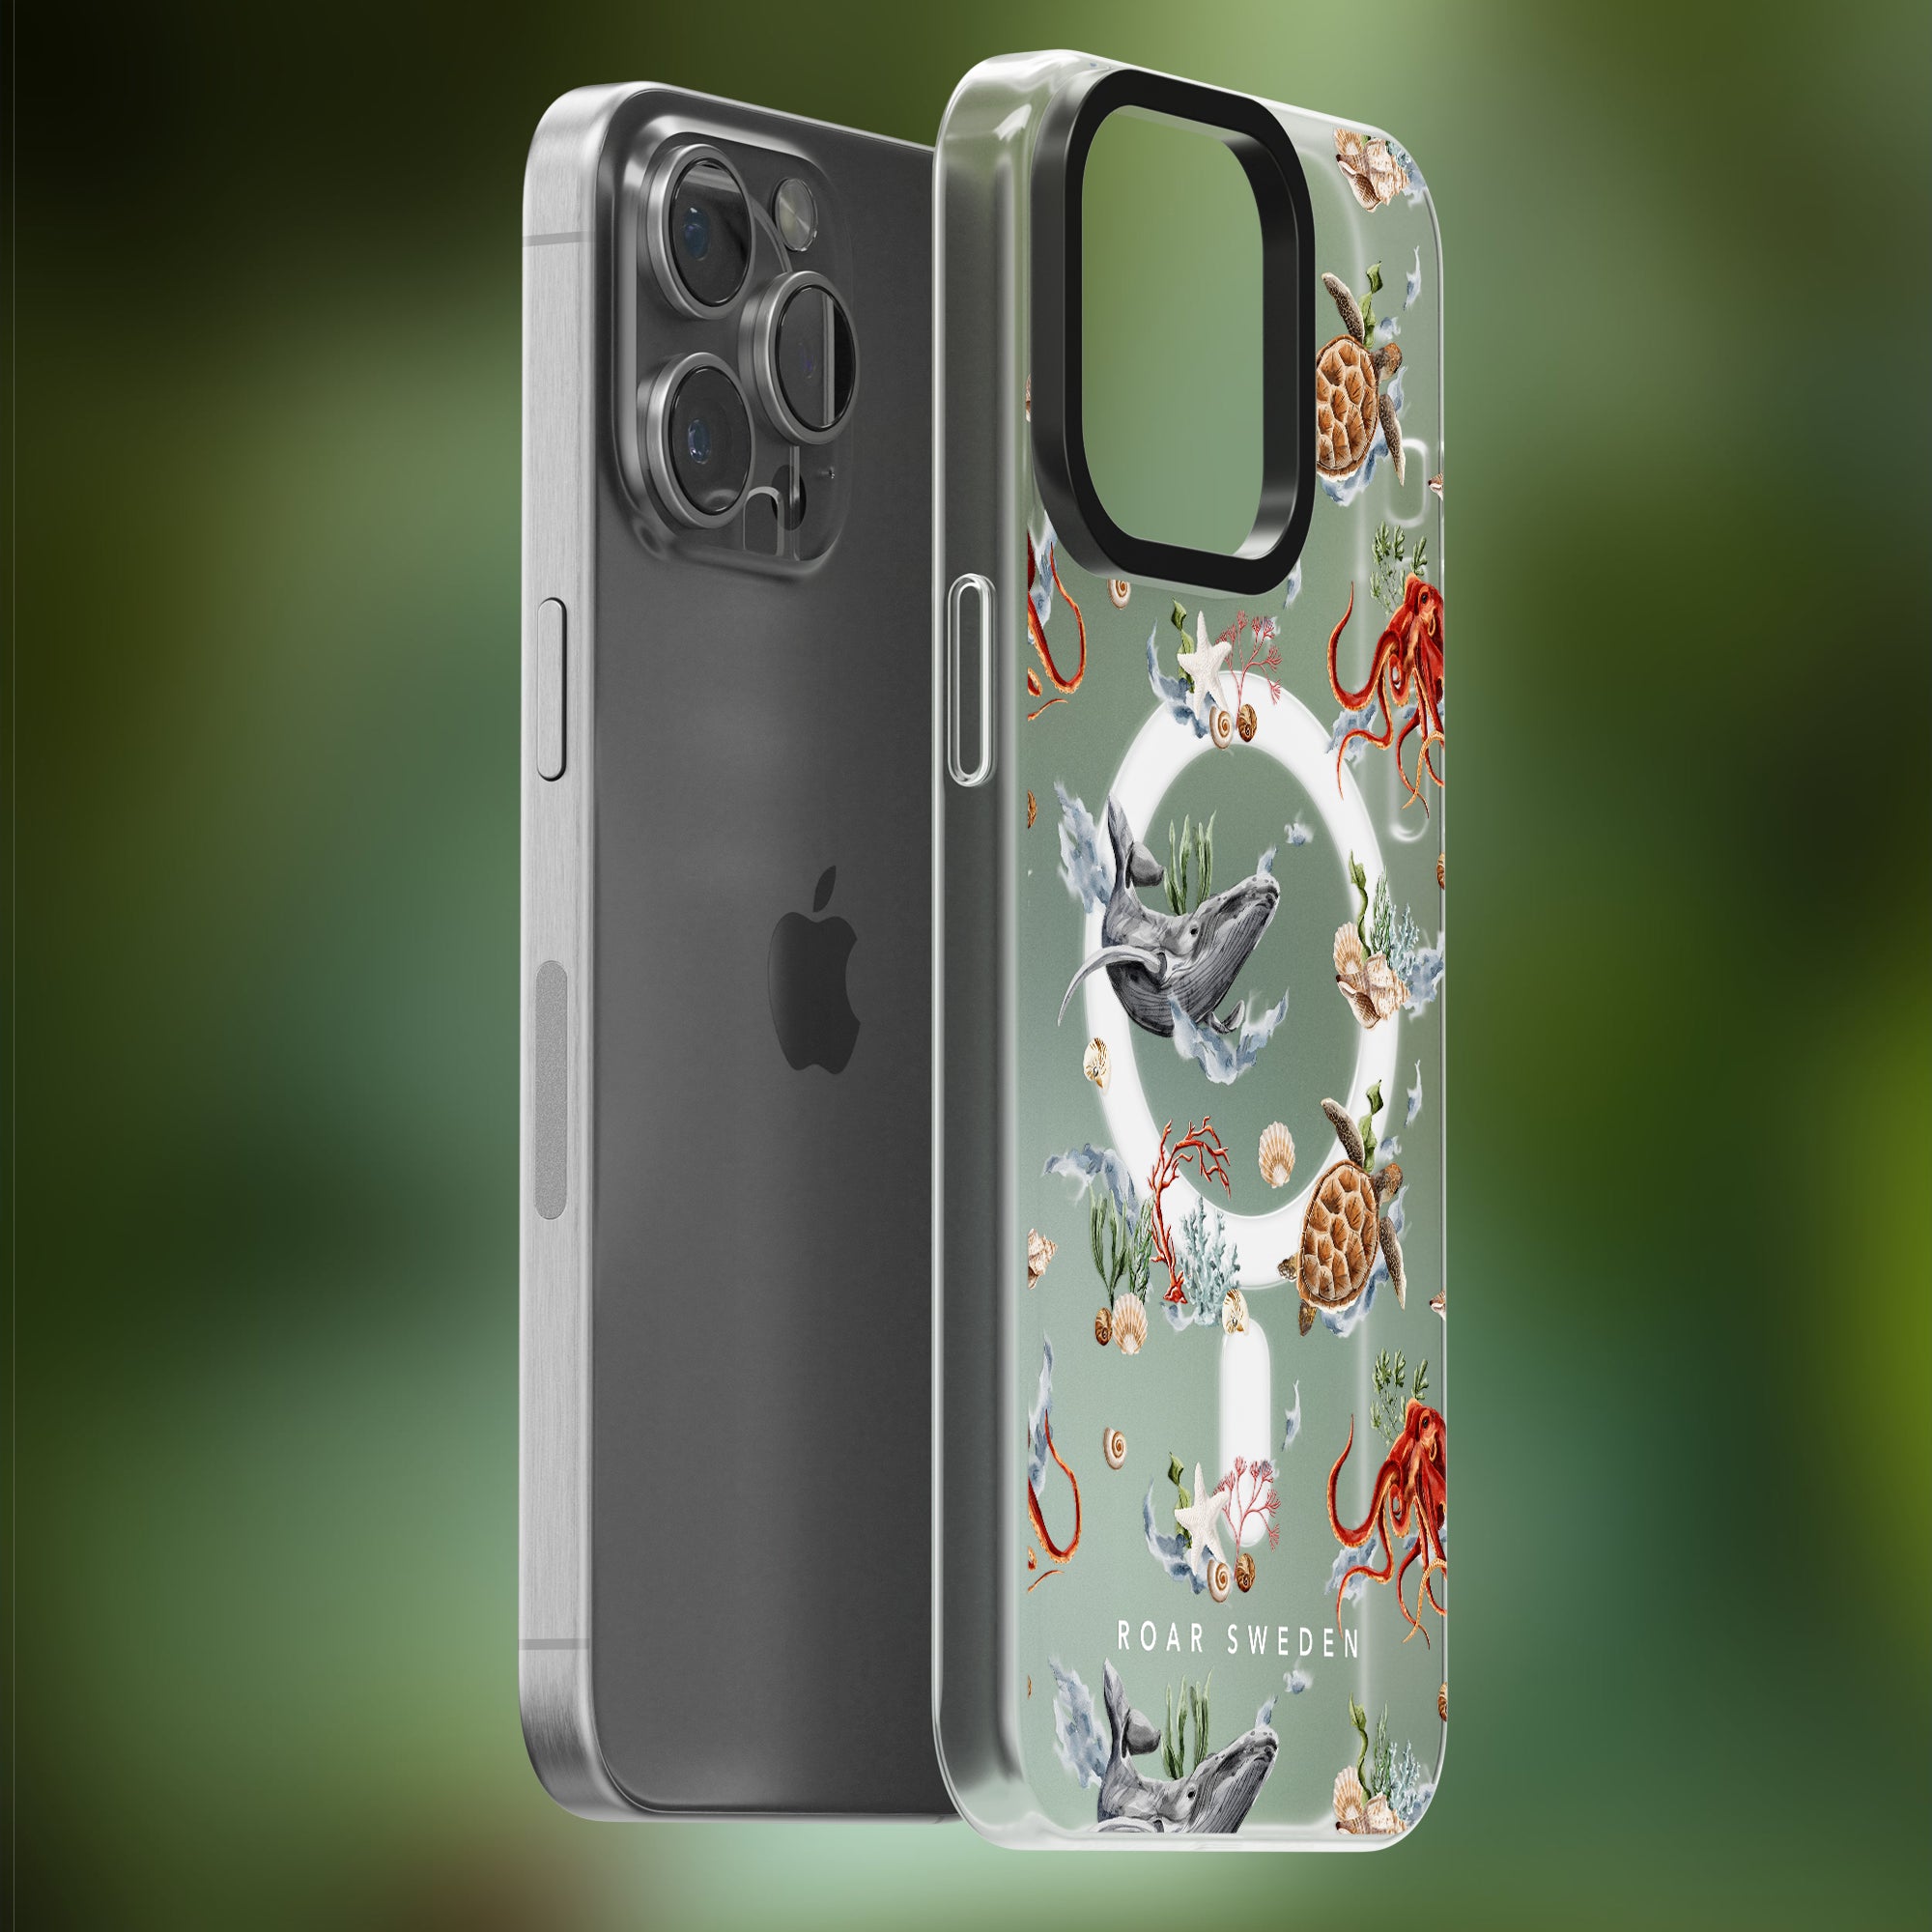 Two iPhones, one with a plain gray back and the other in a clear Deep - MagSafe case decorated with marine life illustrations from the Ocean Collection and the text "ROAR SWEDEN" on a green backdrop.